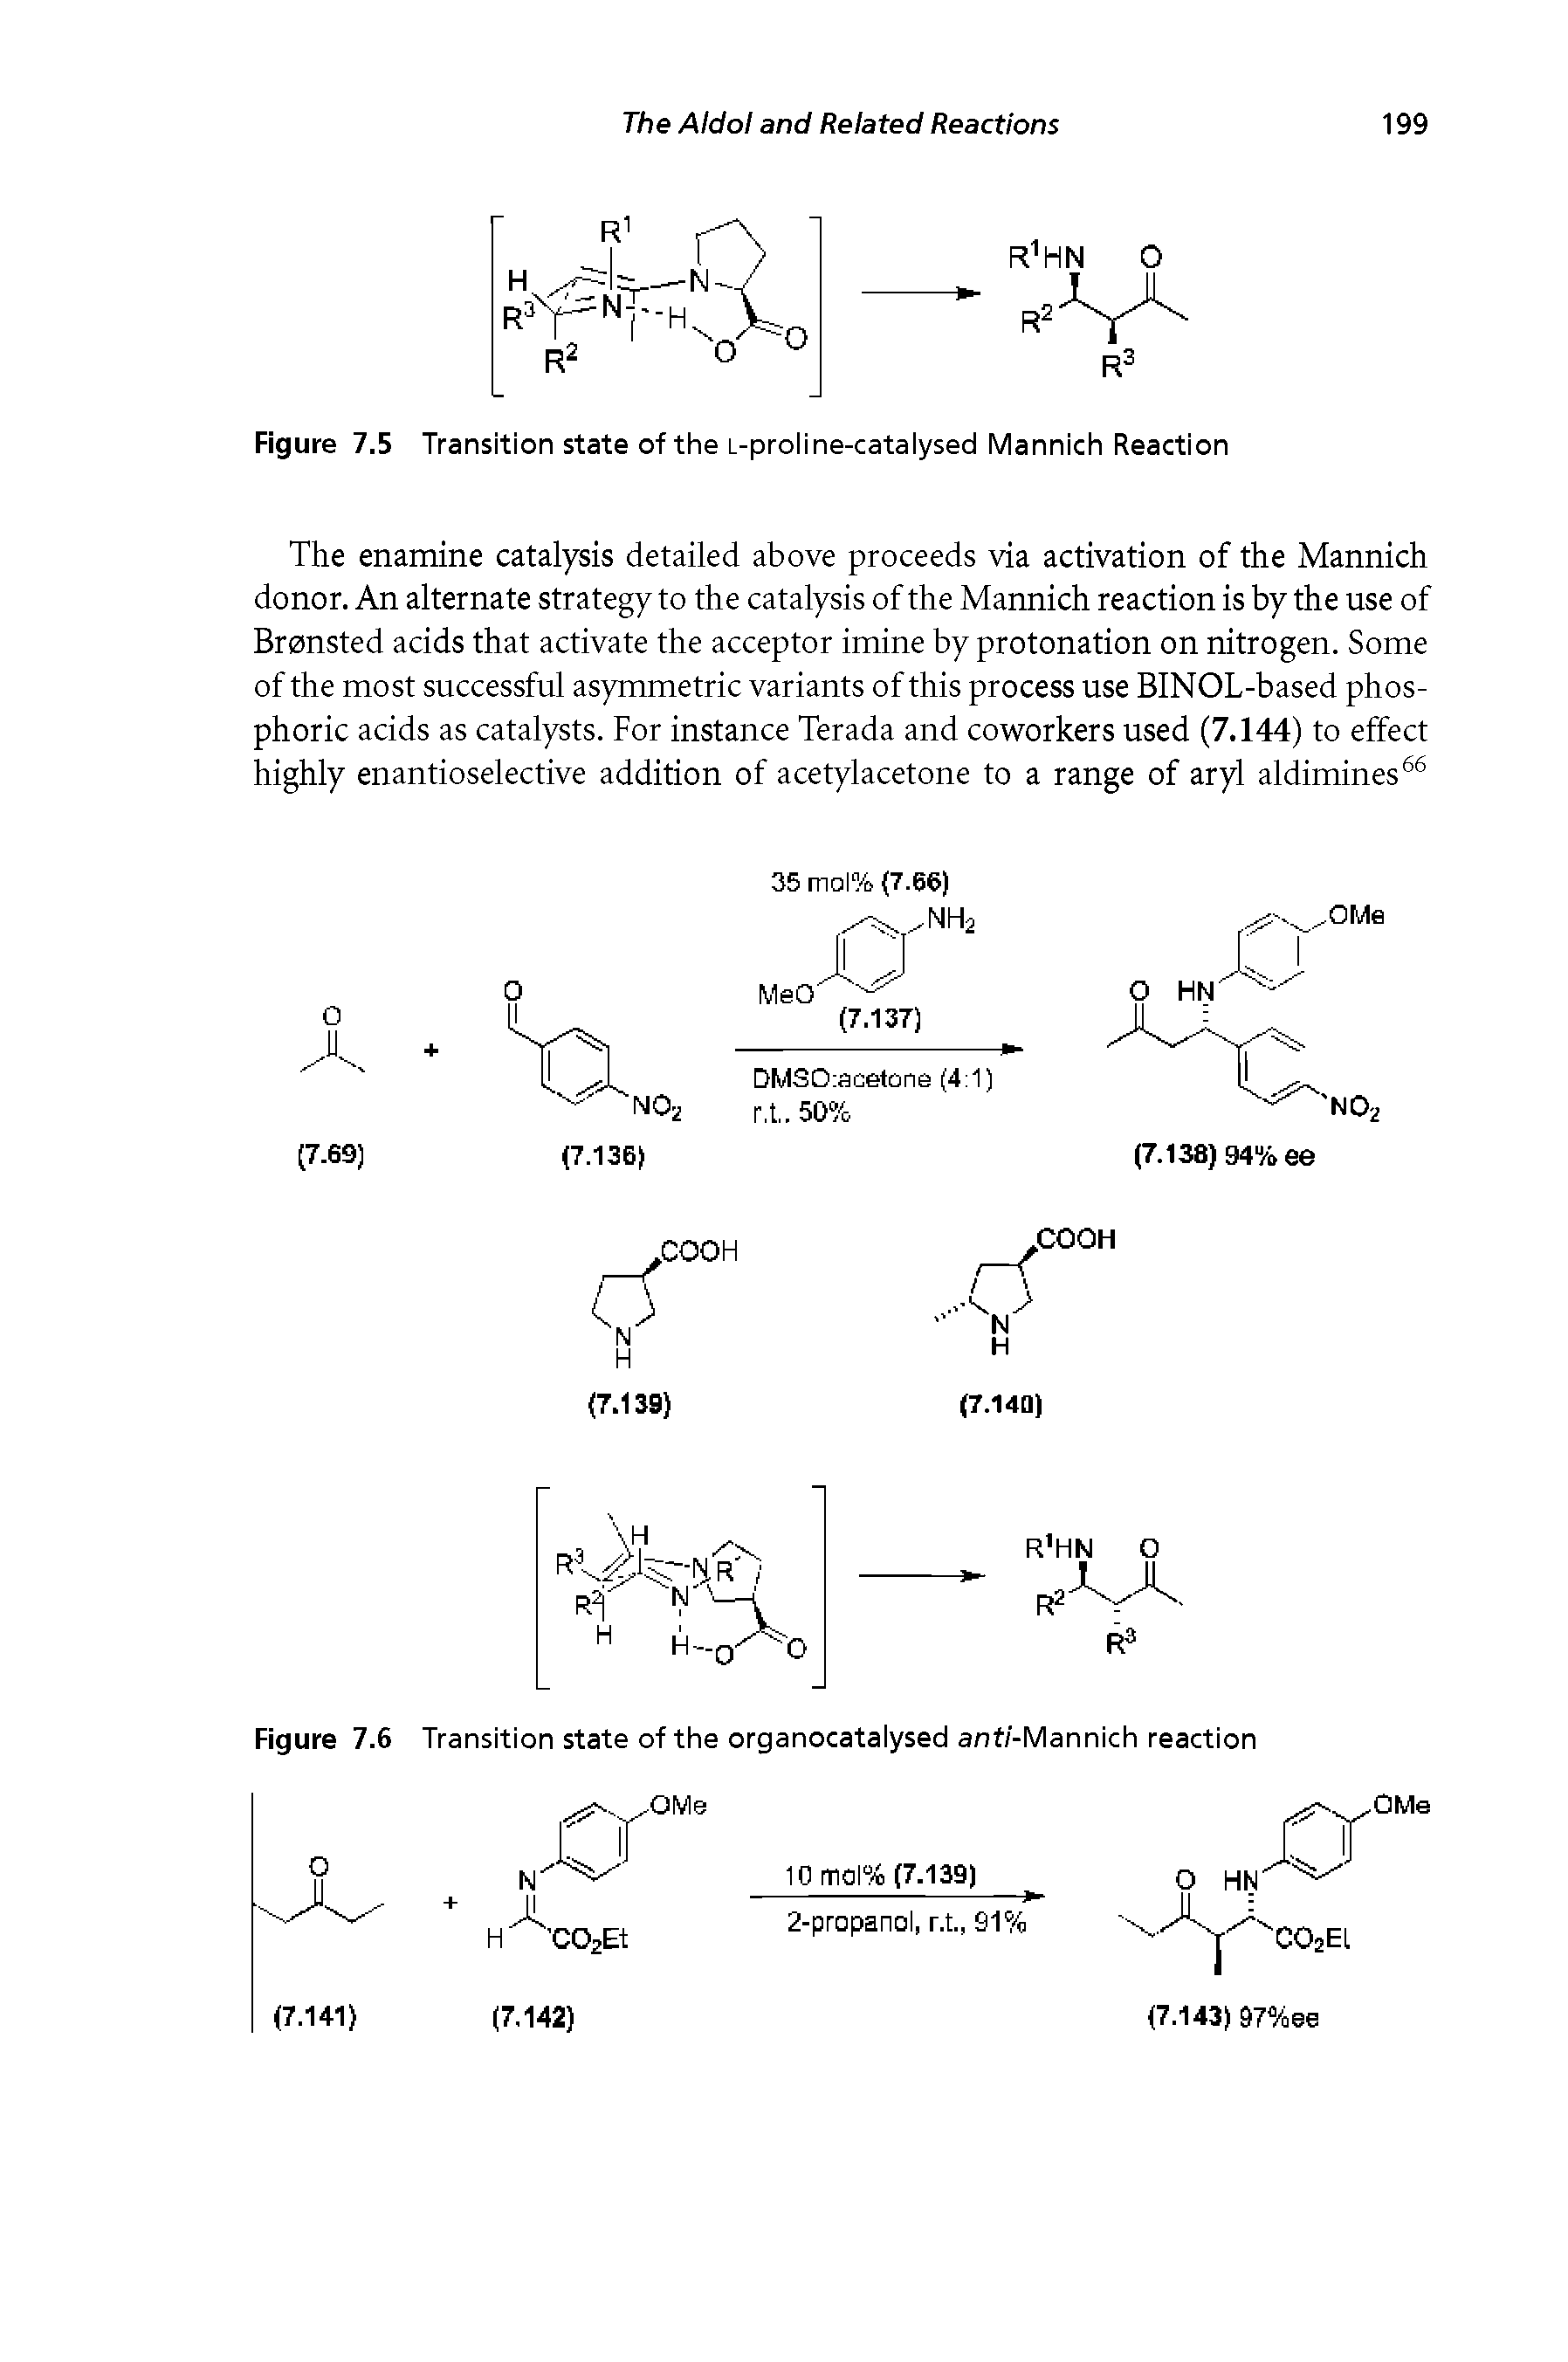 Figure 7.6 Transition state of the organocatalysed anf/-Mannich reaction...